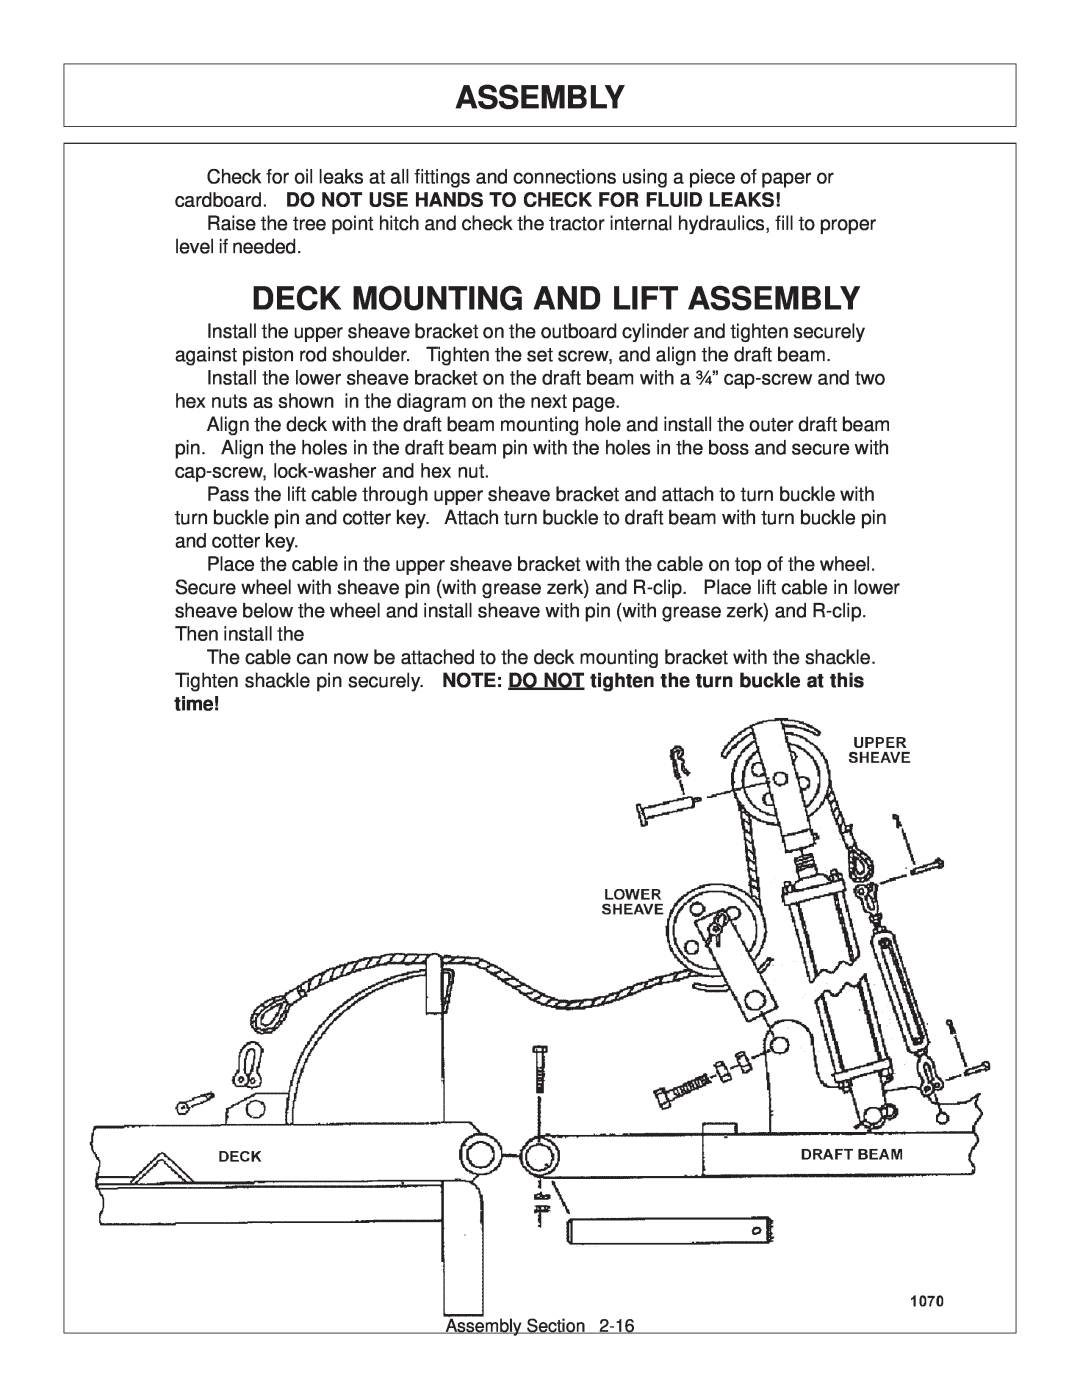 Tiger Products Co., Ltd 6020009 manual Deck Mounting And Lift Assembly 